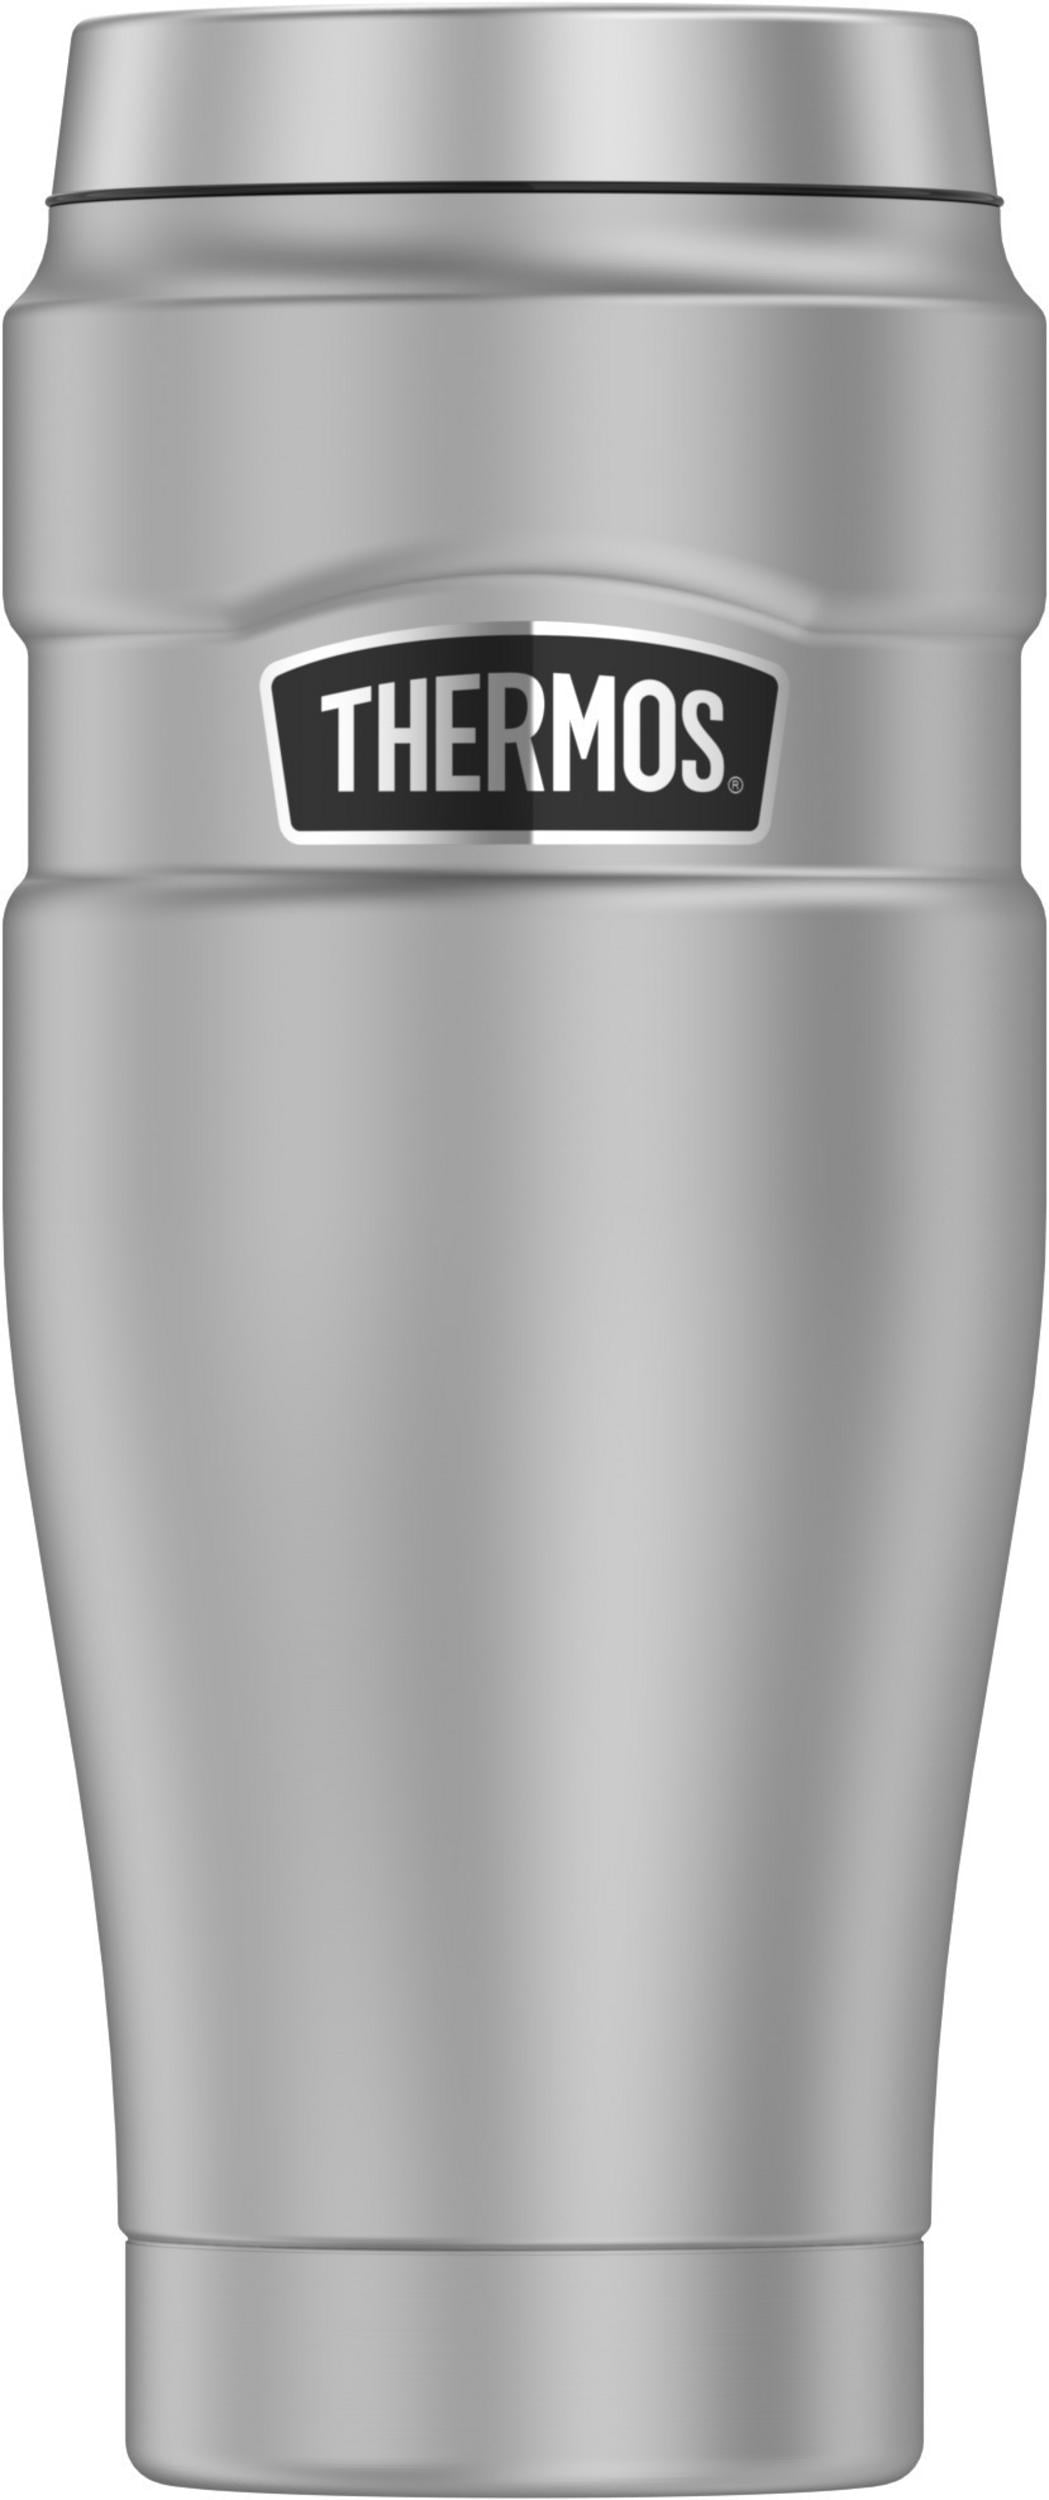 Thermos 16 oz. Stainless King Vacuum Insulated Travel Mug - Matte Silver